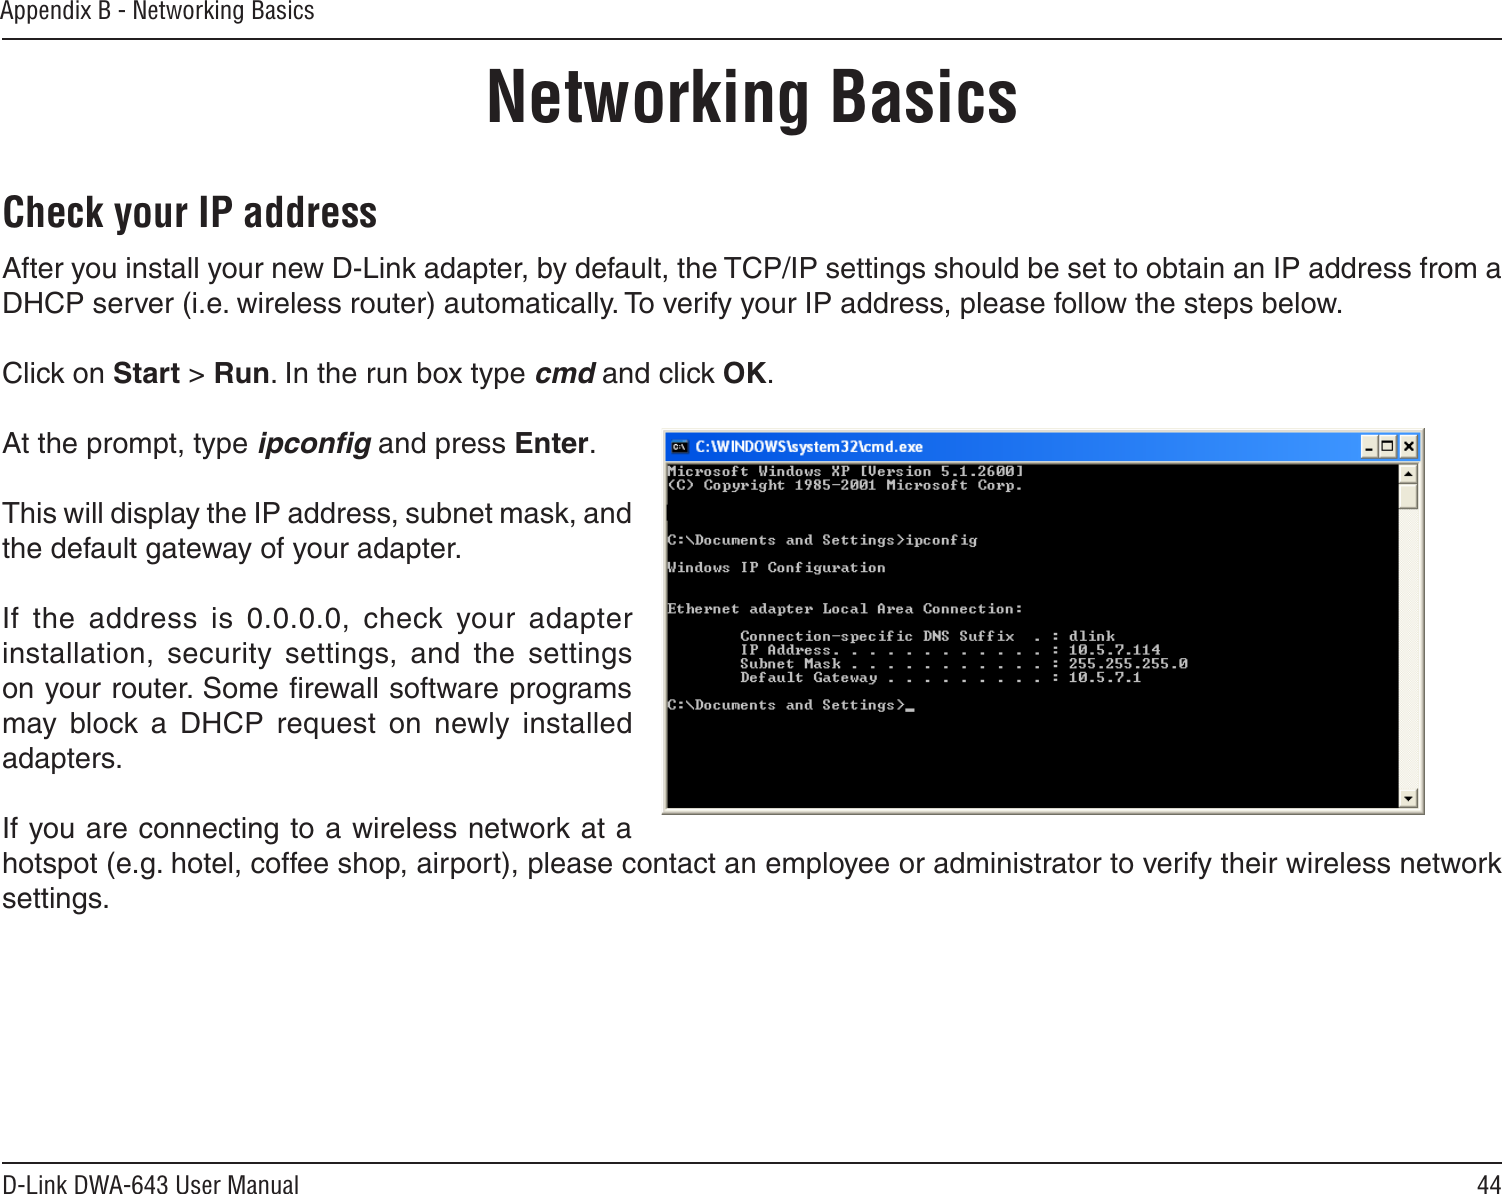 44D-Link DWA-643 User ManualAppendix B - Networking BasicsNetworking BasicsCheck your IP addressAfter you install your new D-Link adapter, by default, the TCP/IP settings should be set to obtain an IP address from a DHCP server (i.e. wireless router) automatically. To verify your IP address, please follow the steps below.Click on Start &gt; Run. In the run box type cmd and click OK.At the prompt, type ipconﬁg and press Enter.This will display the IP address, subnet mask, and the default gateway of your adapter.If  the  address  is  0.0.0.0,  check  your  adapter installation,  security  settings,  and  the  settings on your router. Some ﬁrewall software programs may  block  a  DHCP  request  on  newly  installed adapters. If you are connecting to a wireless network at a hotspot (e.g. hotel, coffee shop, airport), please contact an employee or administrator to verify their wireless network settings.